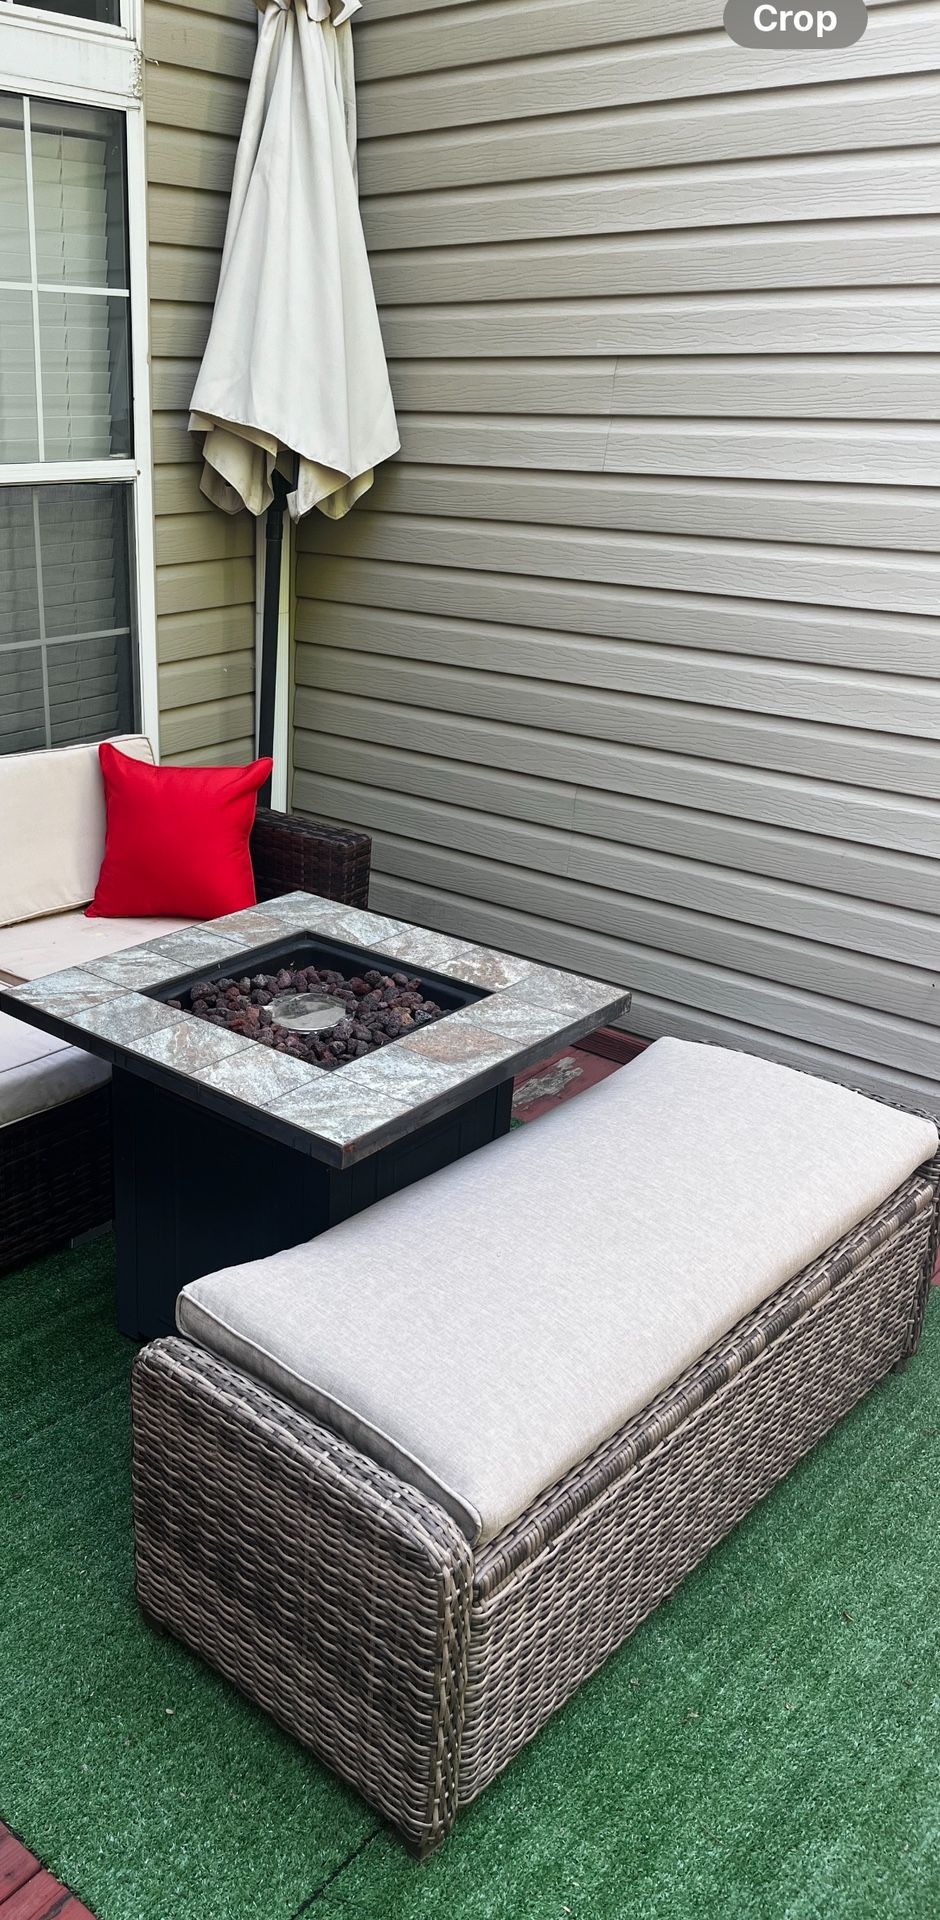 Small Patio Furniture - Pick Up 5/18 or 5/19